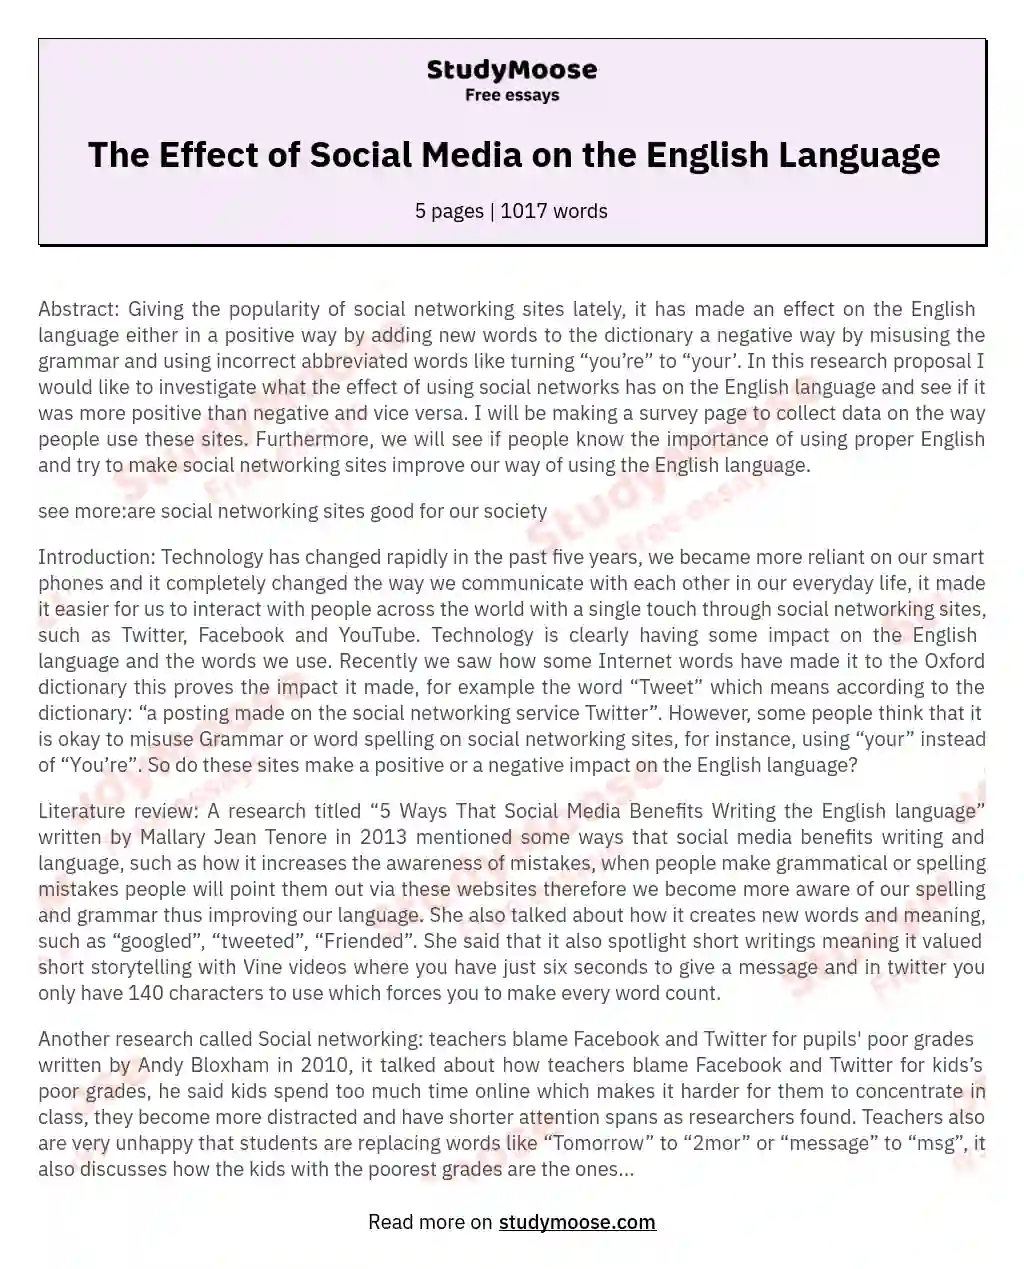 The Effect of Social Media on the English Language essay